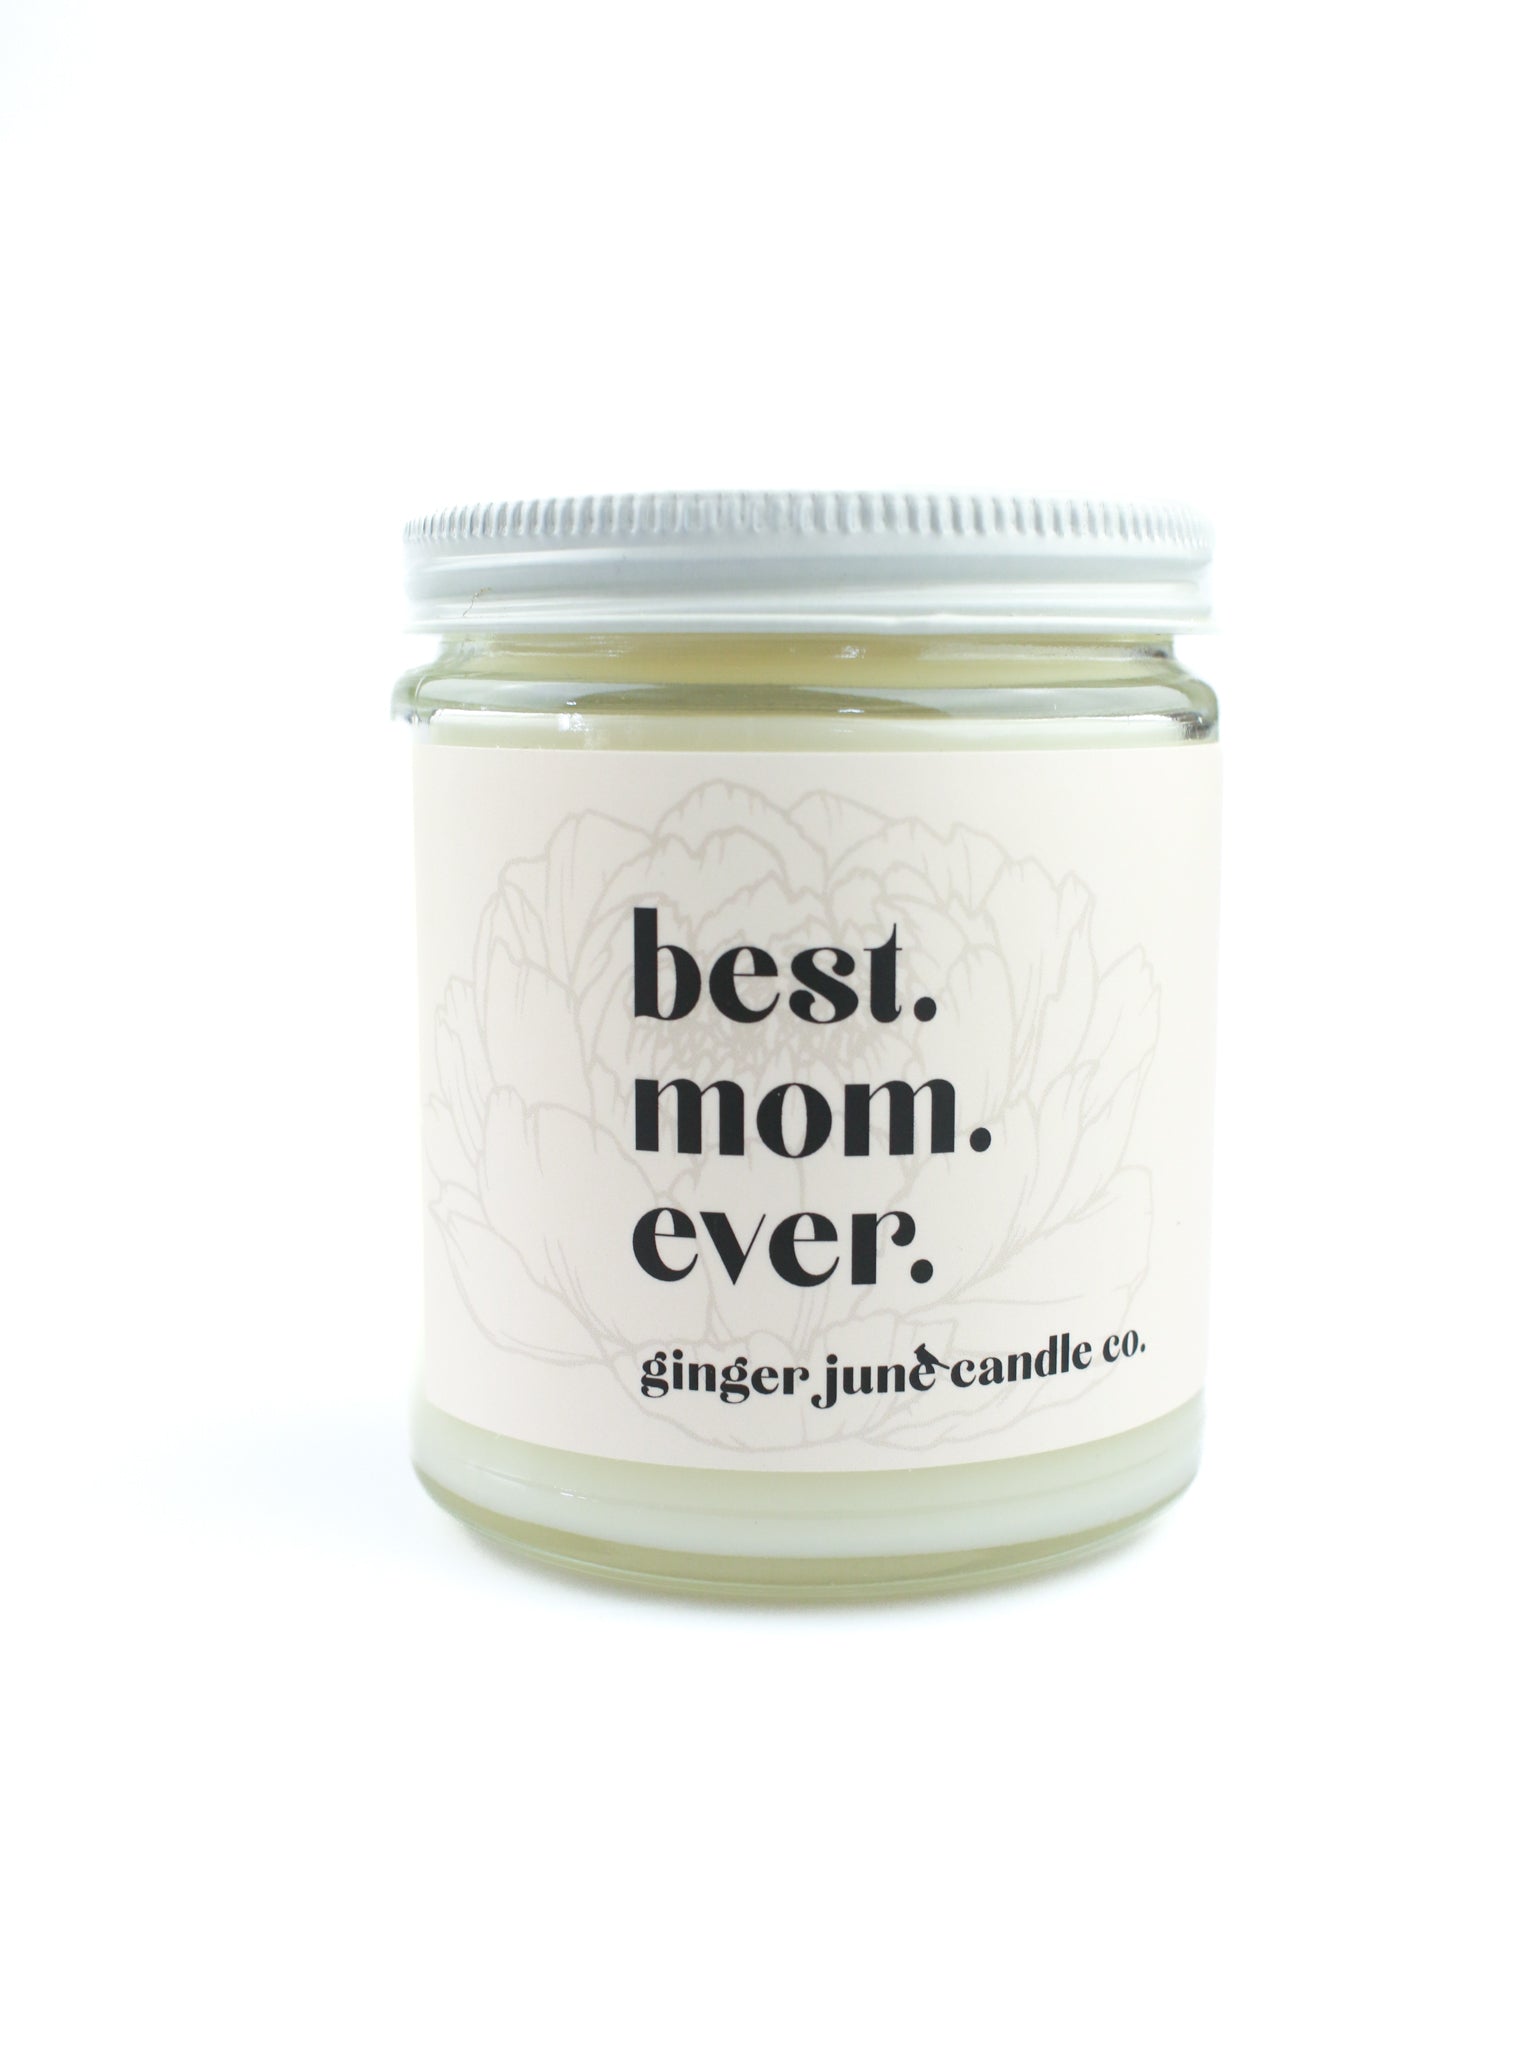 Ginger June Candle Co.